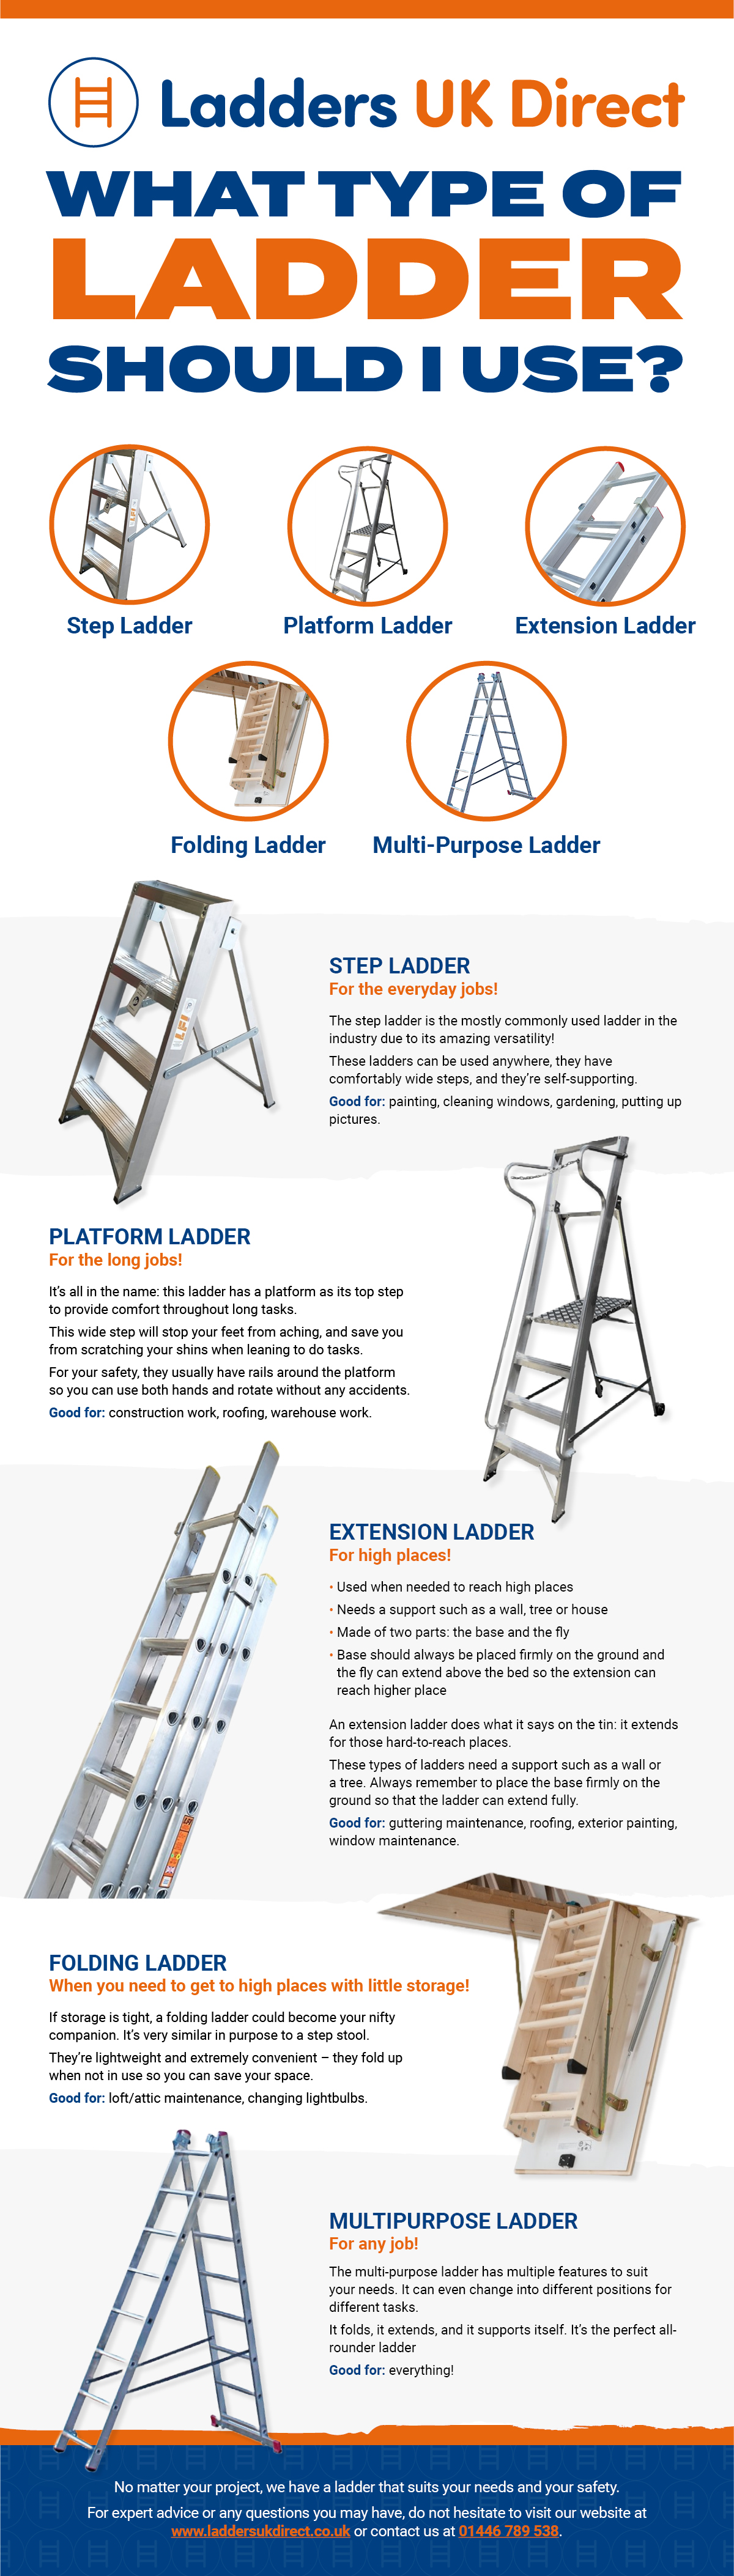 What Type of Ladder Should I Use?